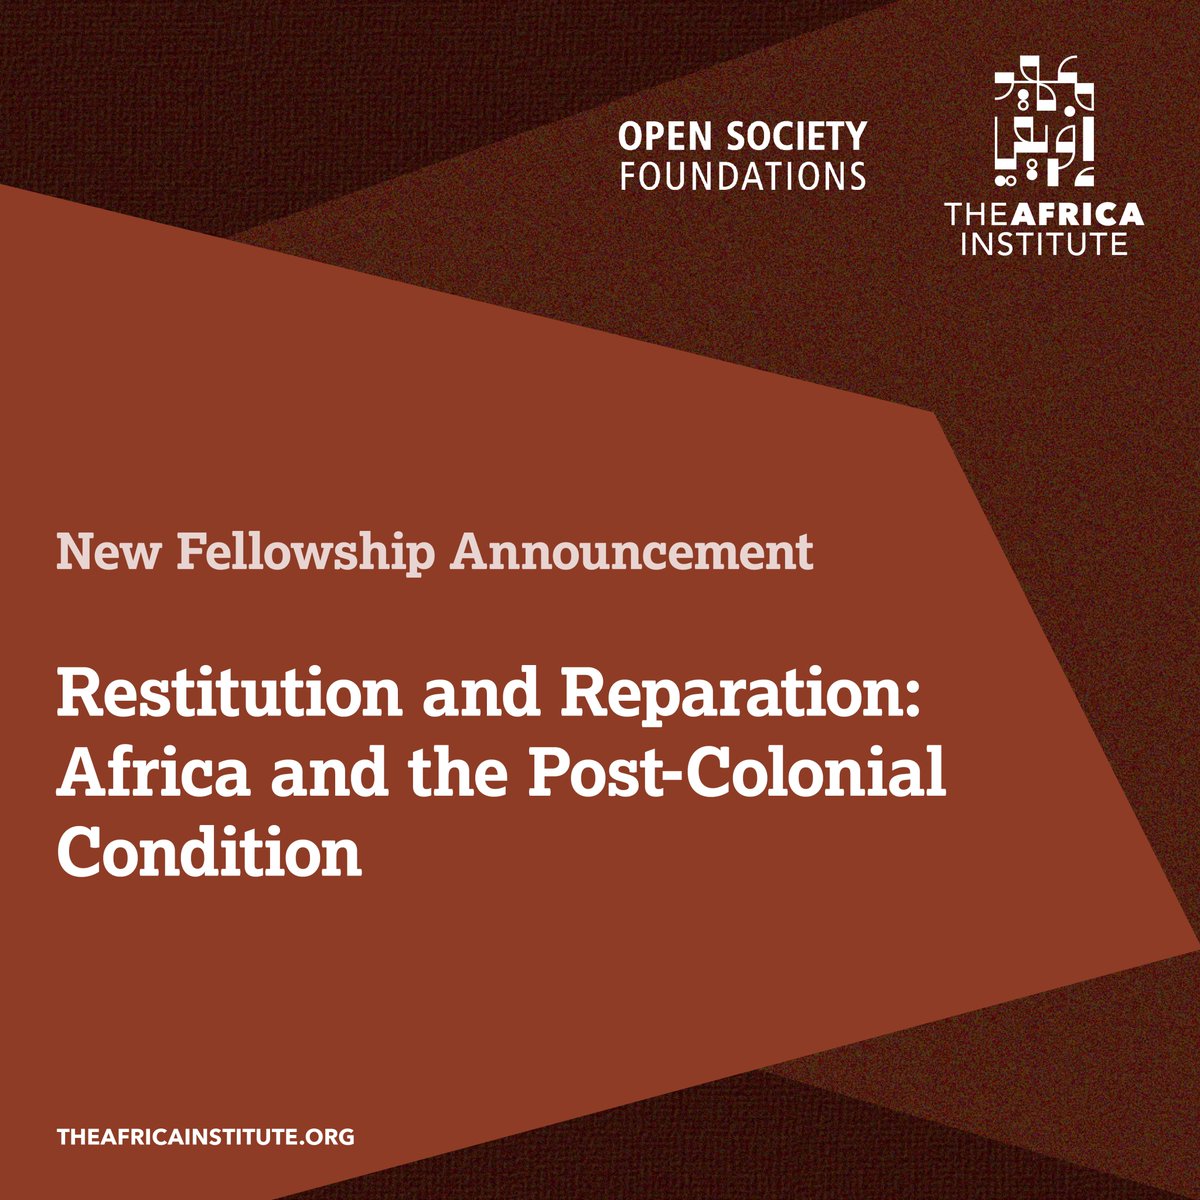 We are excited to unveil a fellowship program, funded by @OpenSociety, addressing African cultural heritage & repatriation! Applications open June 2024. Visit our website to stay updated and learn more: theafricainstitute.org/open-society-g…